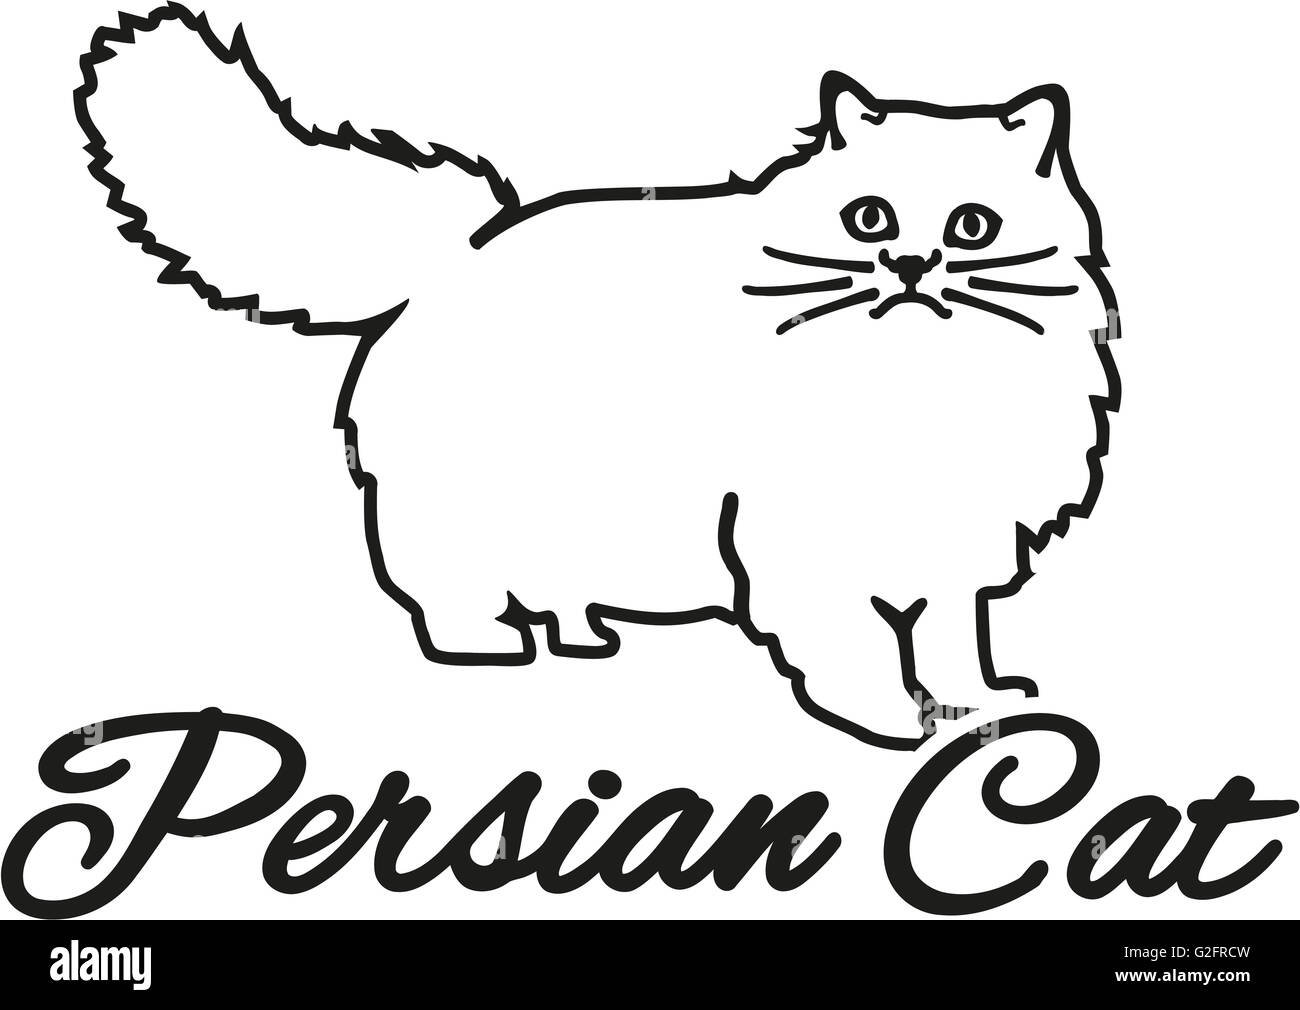 Persian cat with breed name Stock Photo